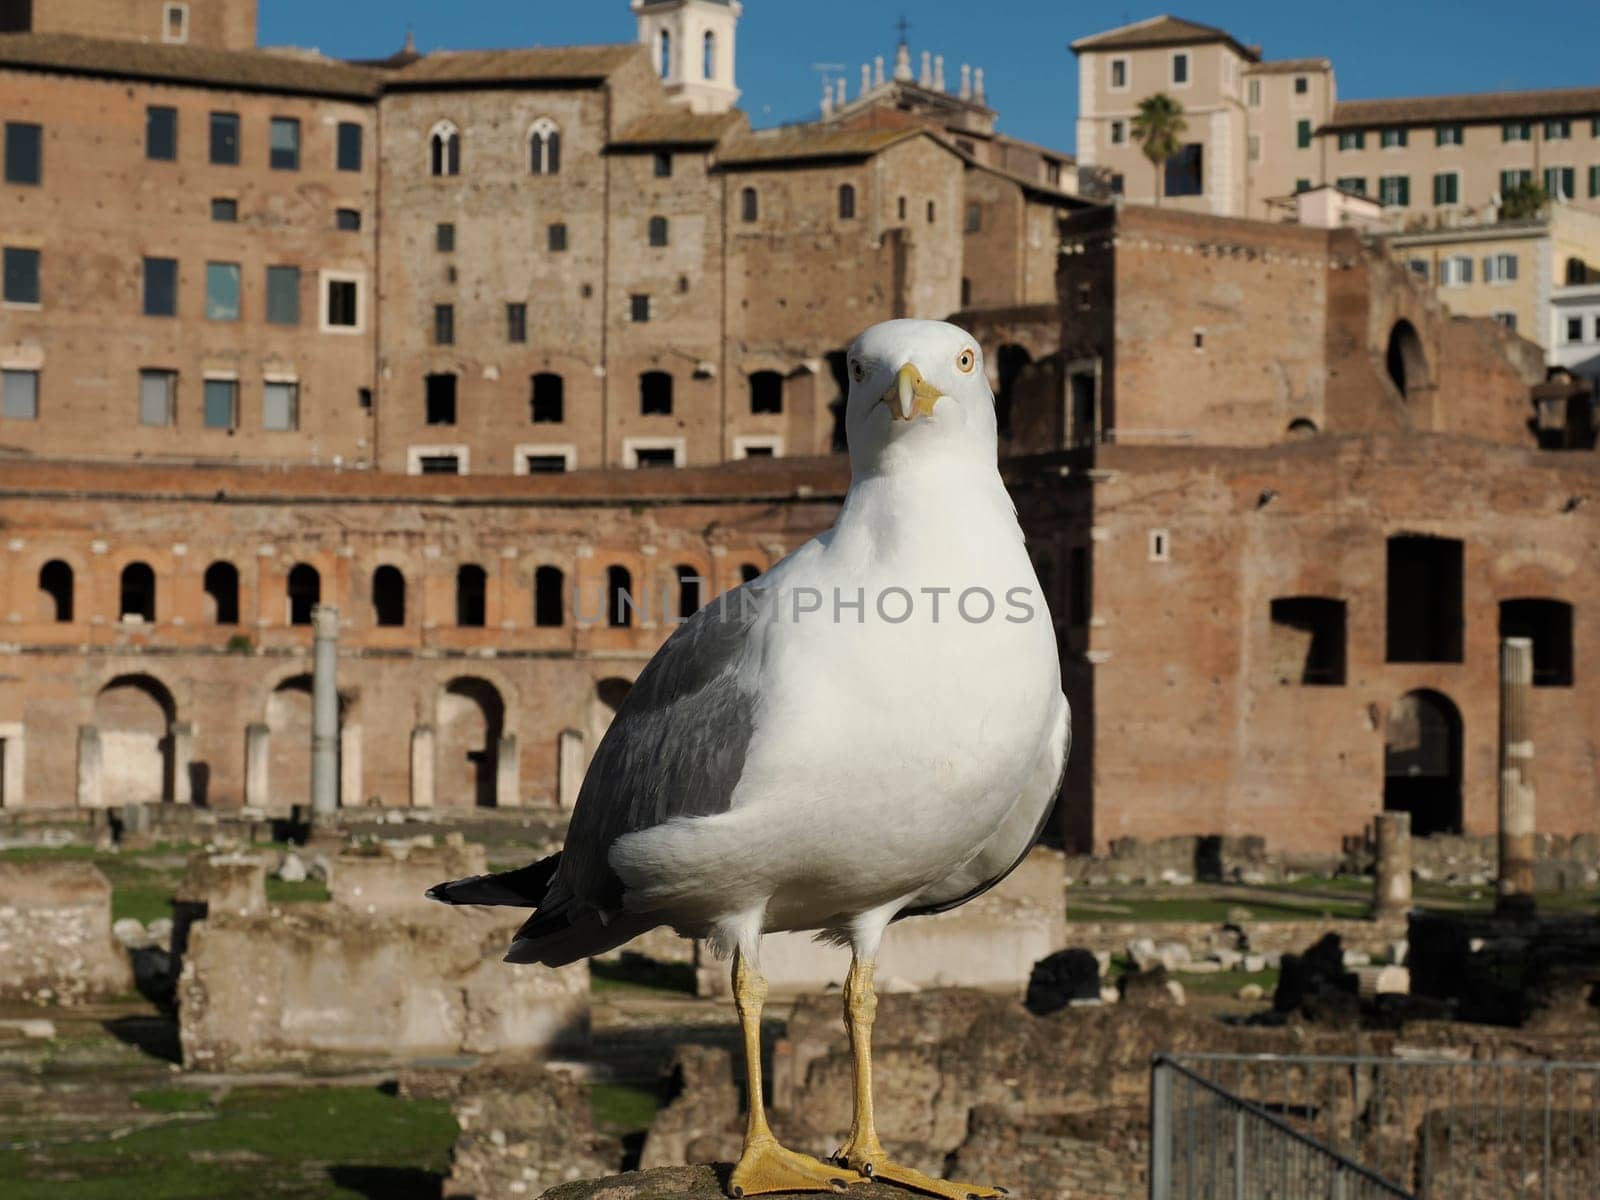 seagull portrait on fori imperiali rome buildings on walkway view imperial forums